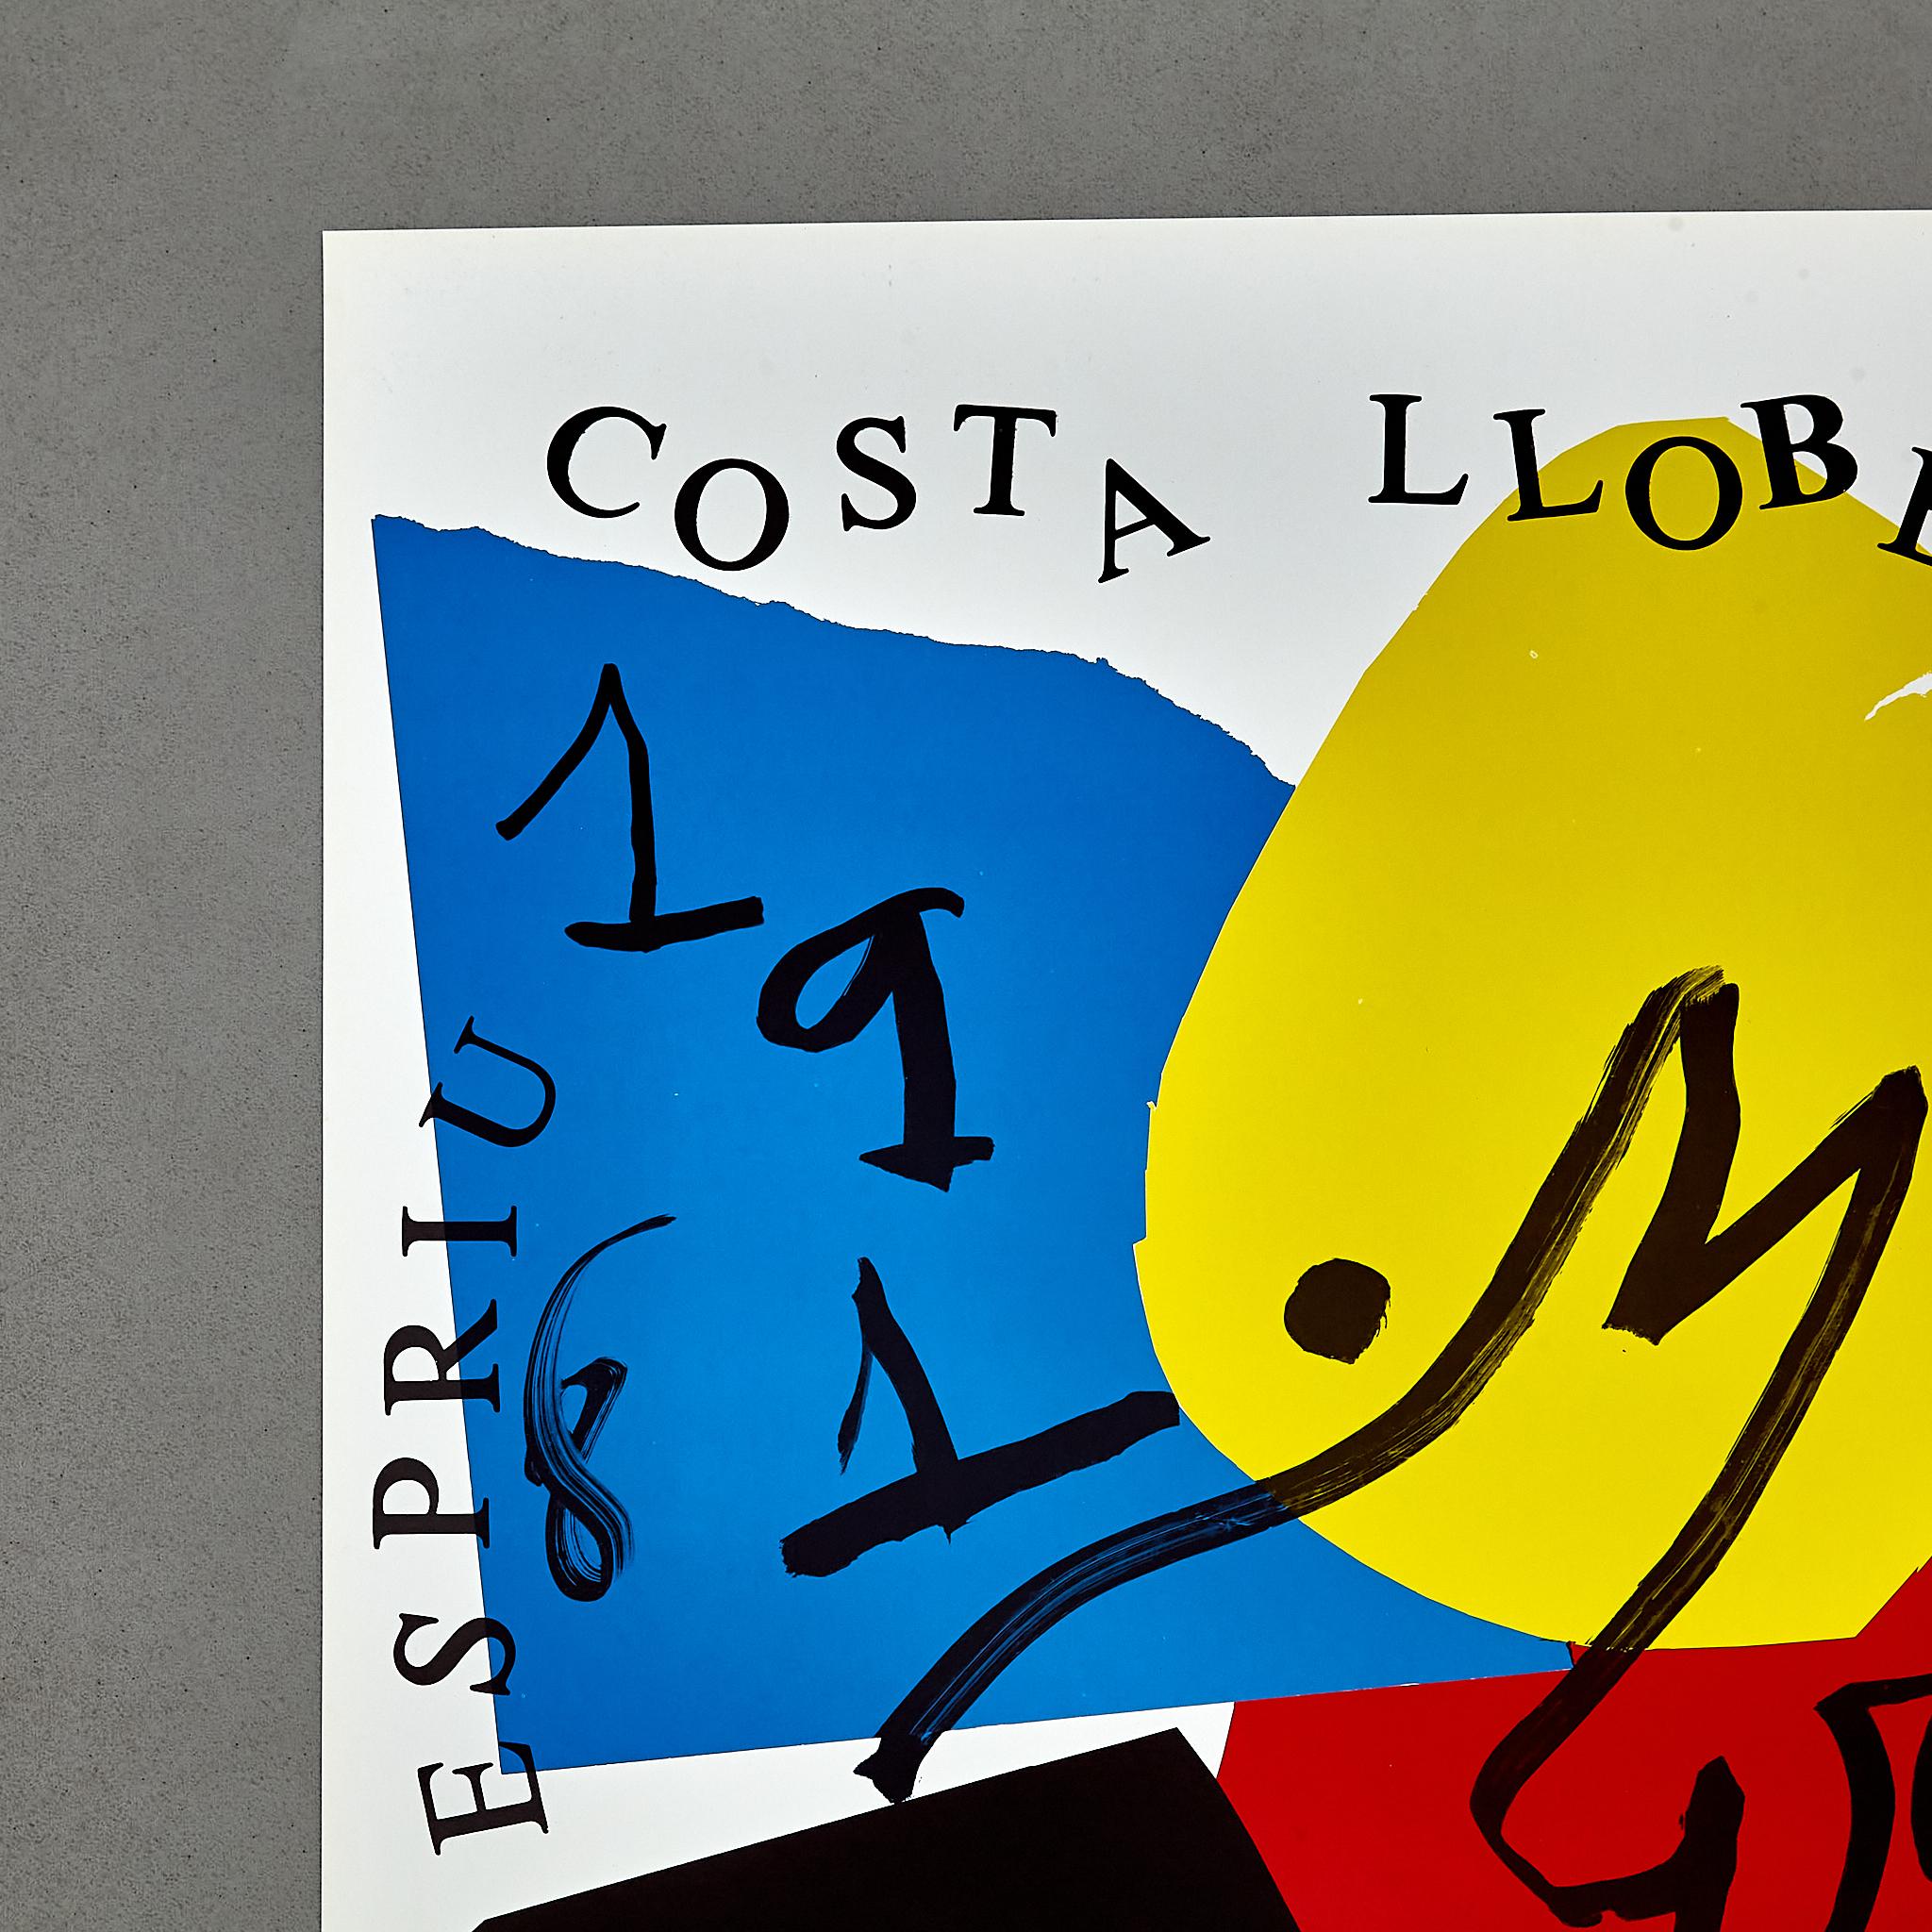 Spanish Poster of Costa Llobera by Joan Miró, circa 1981. For Sale